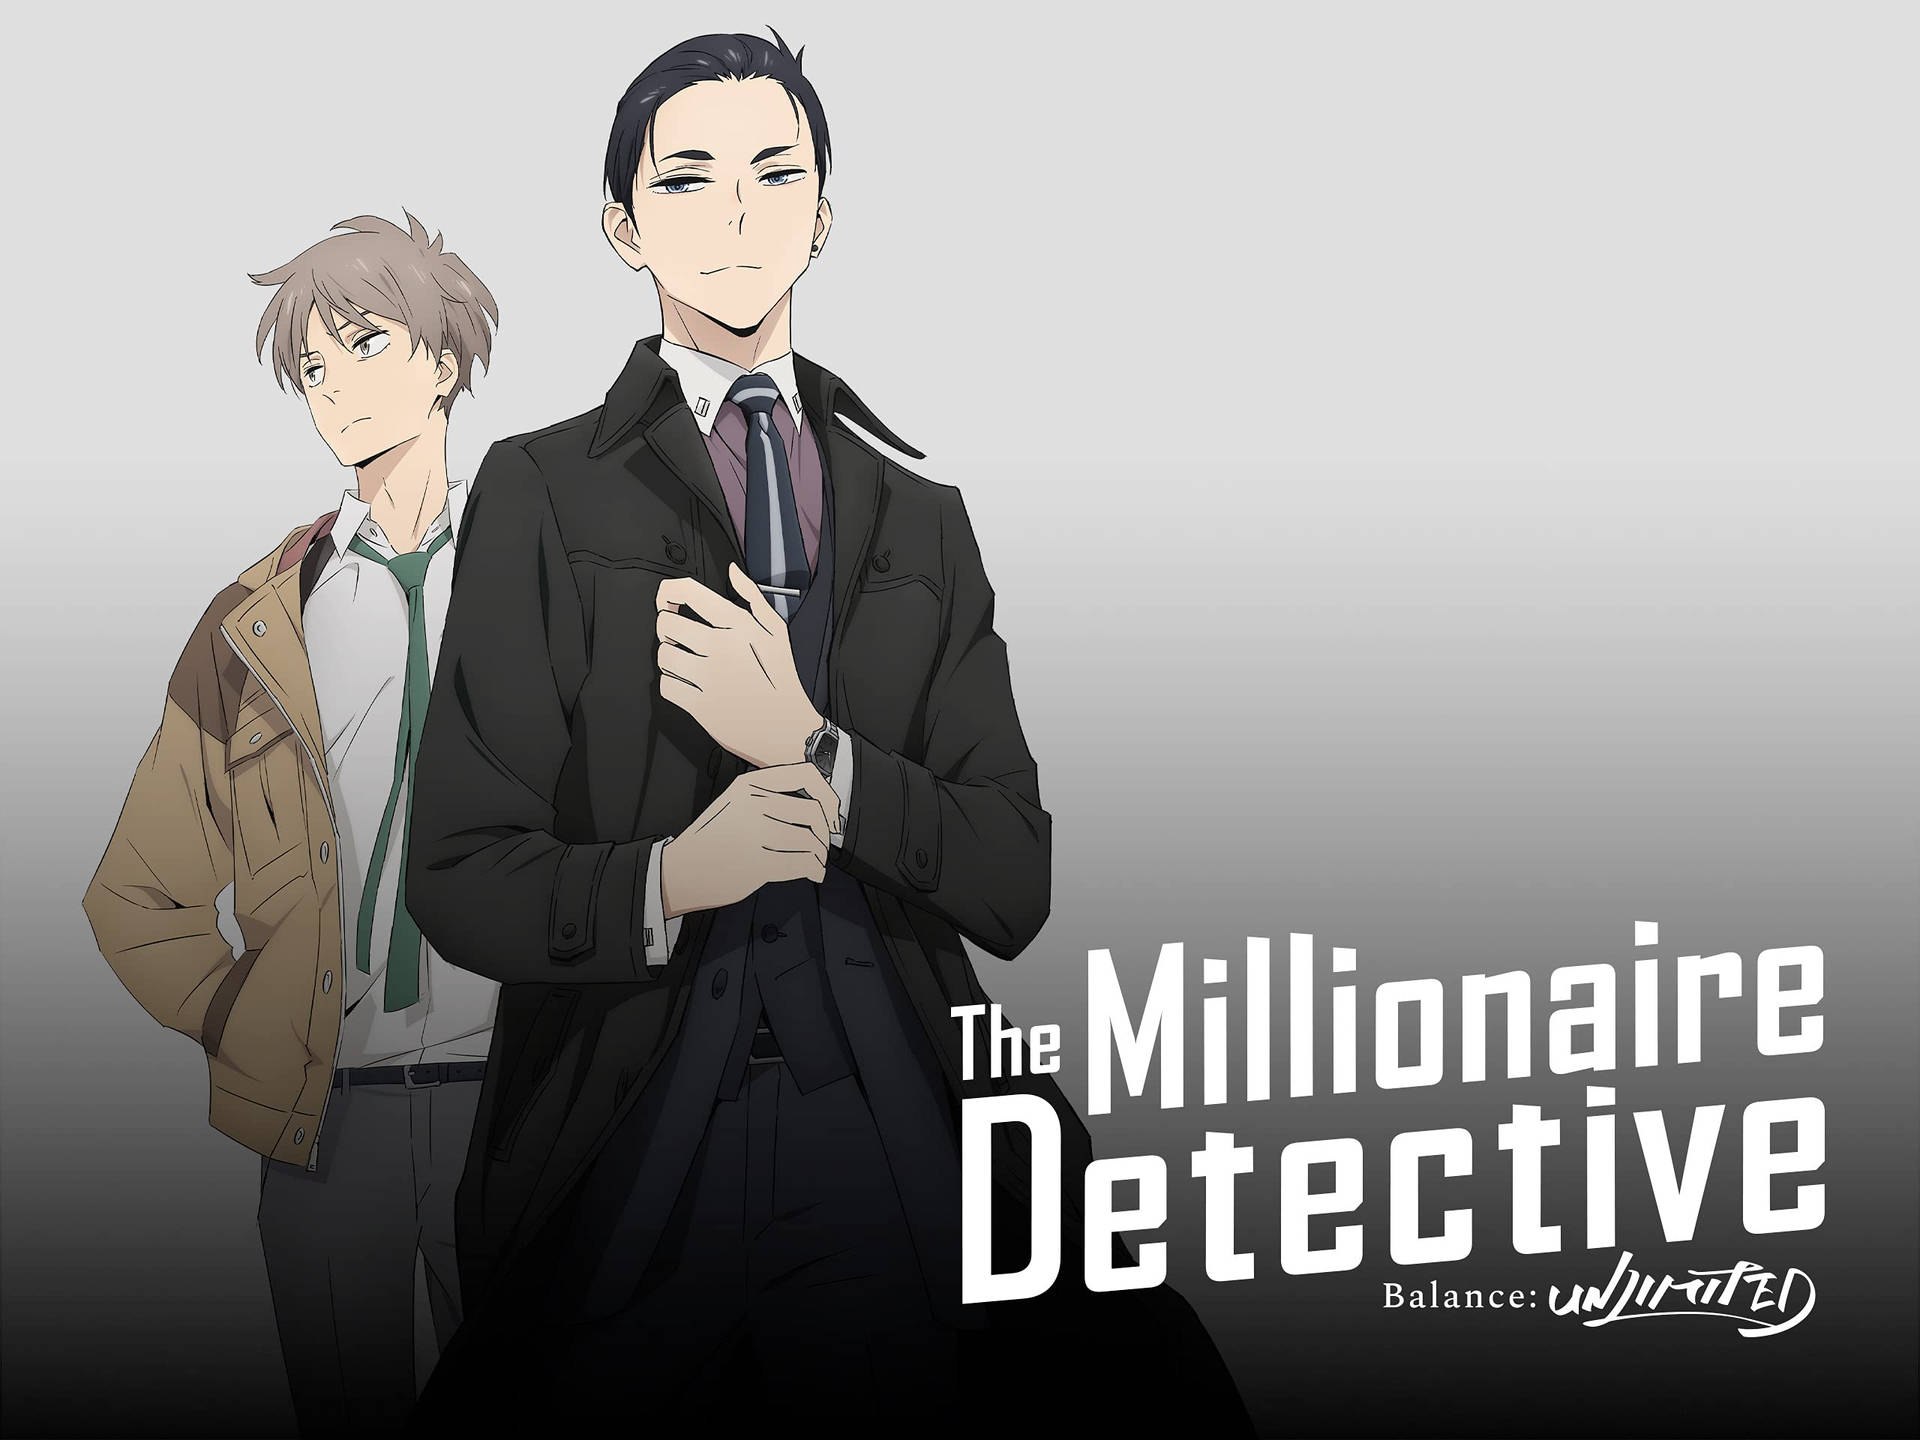 The Millionaire Detective Balance: UNLIMITED - Intriguing Anime Series Wallpaper